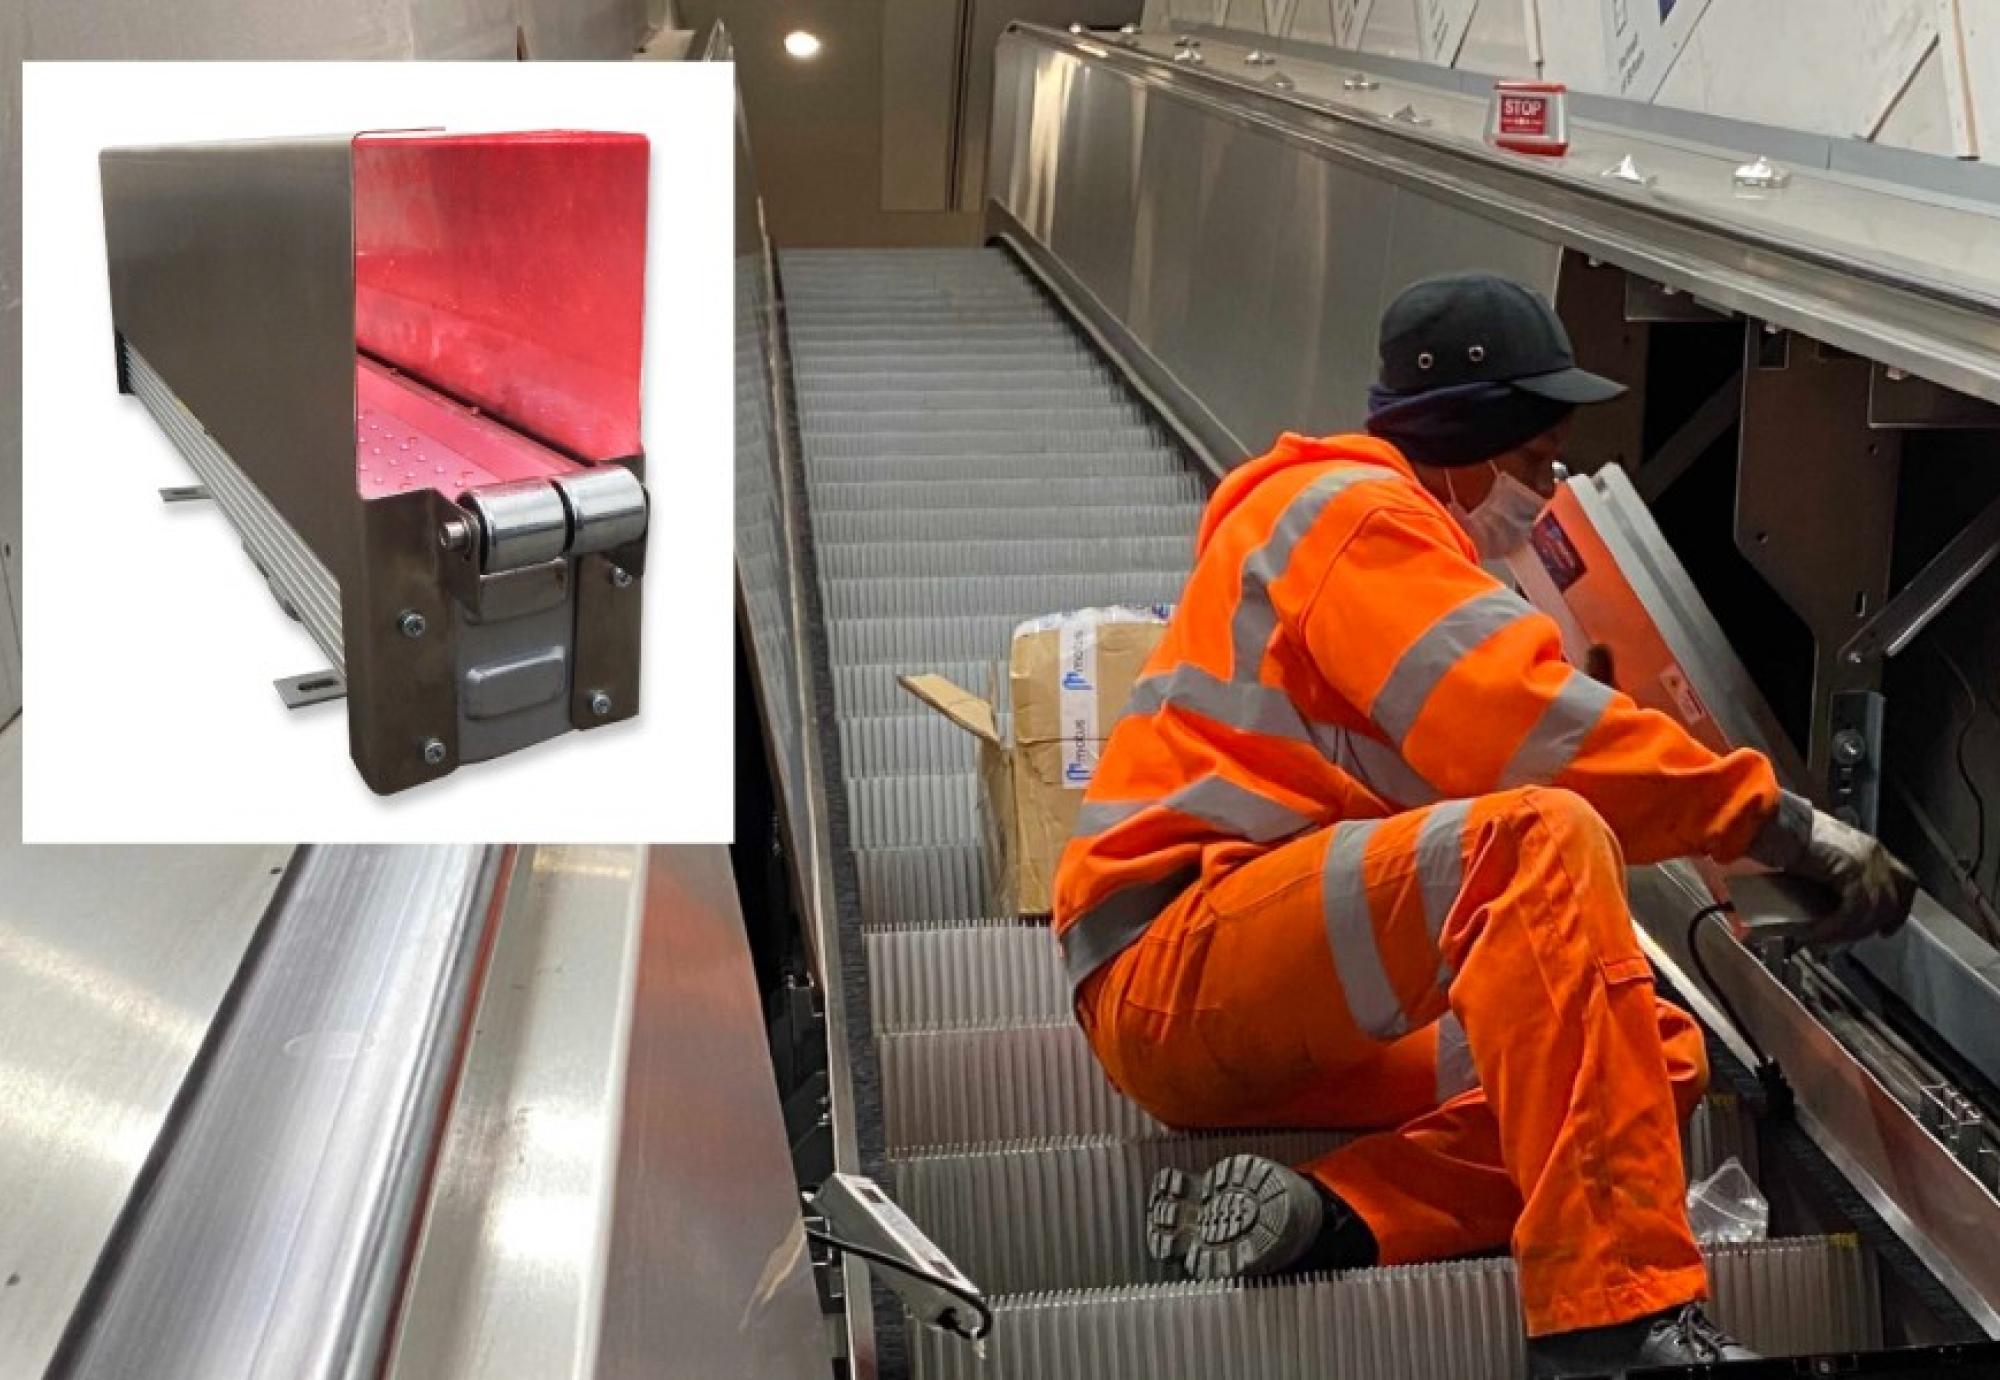 UV-C handrail cleaning device trialled at Euston